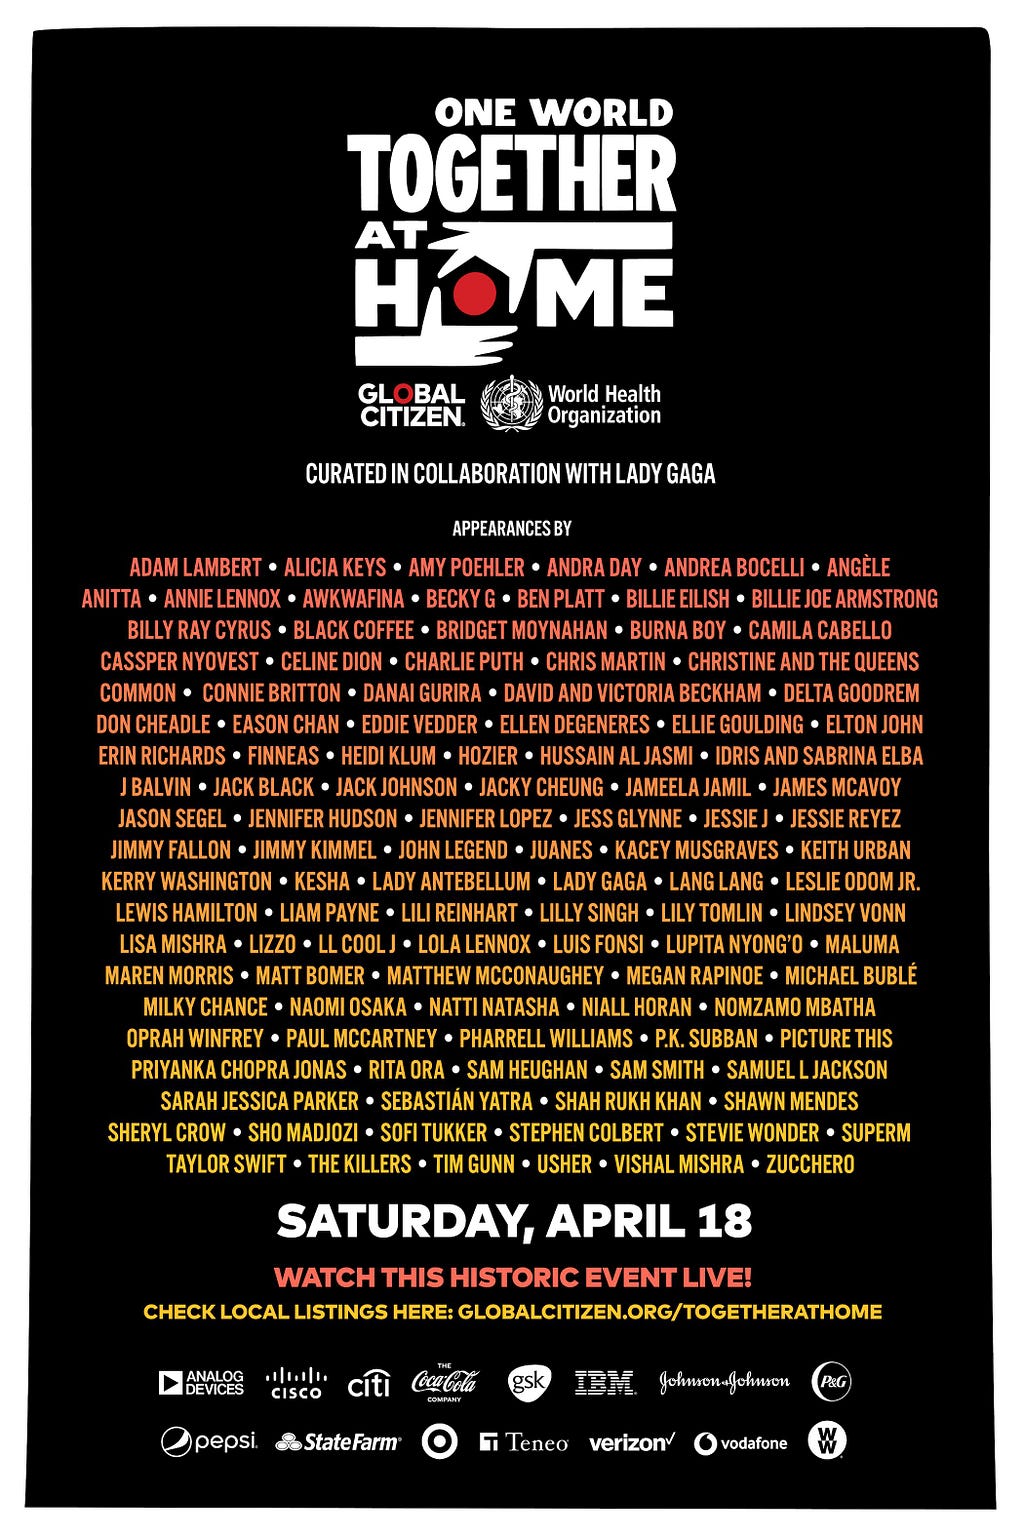 Promotional list of artists participating in One World Together At Home.